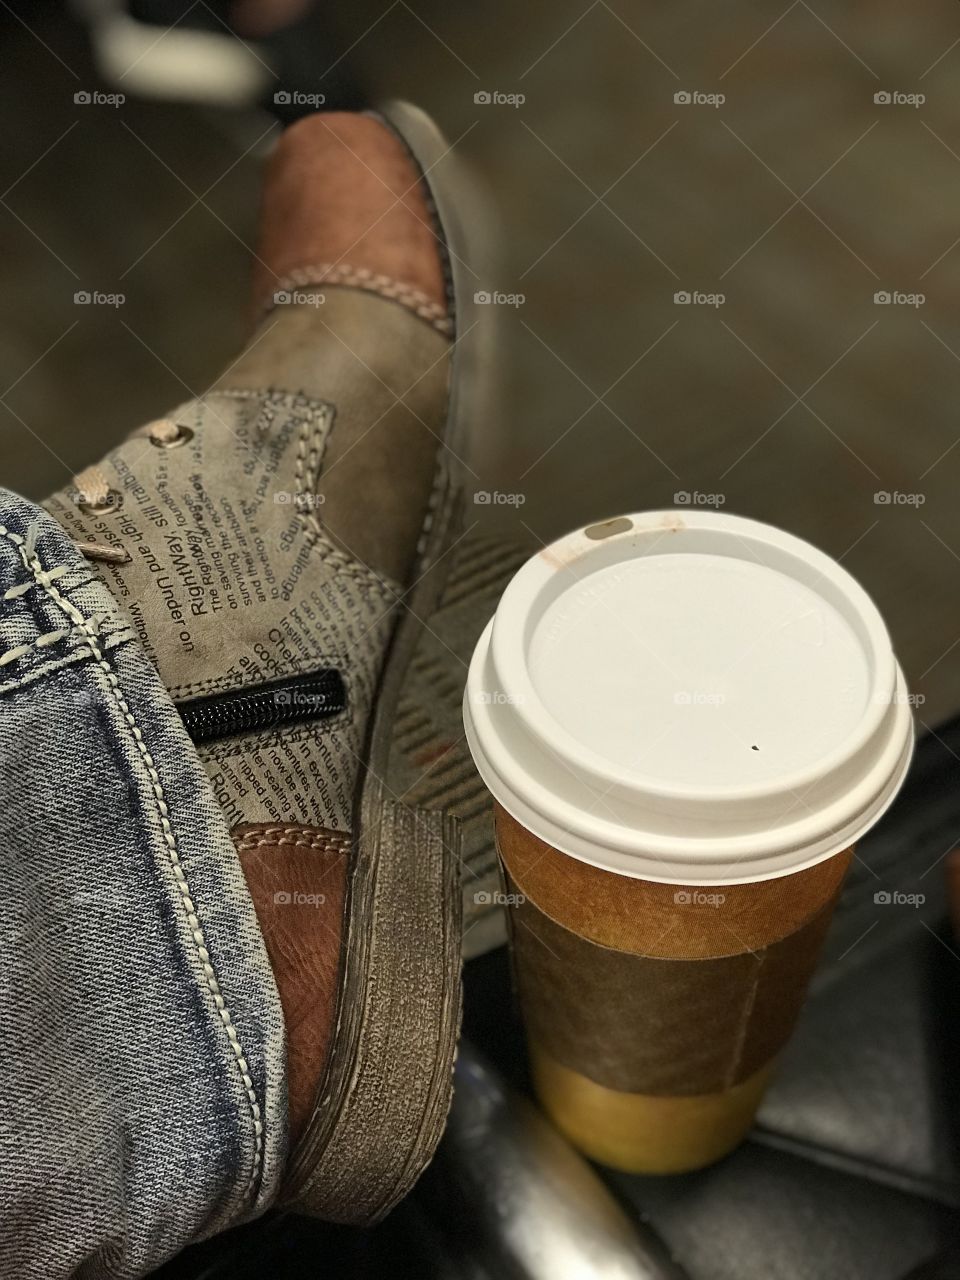 News on my feet, hot Starbucks cappuccino helps with business travel 